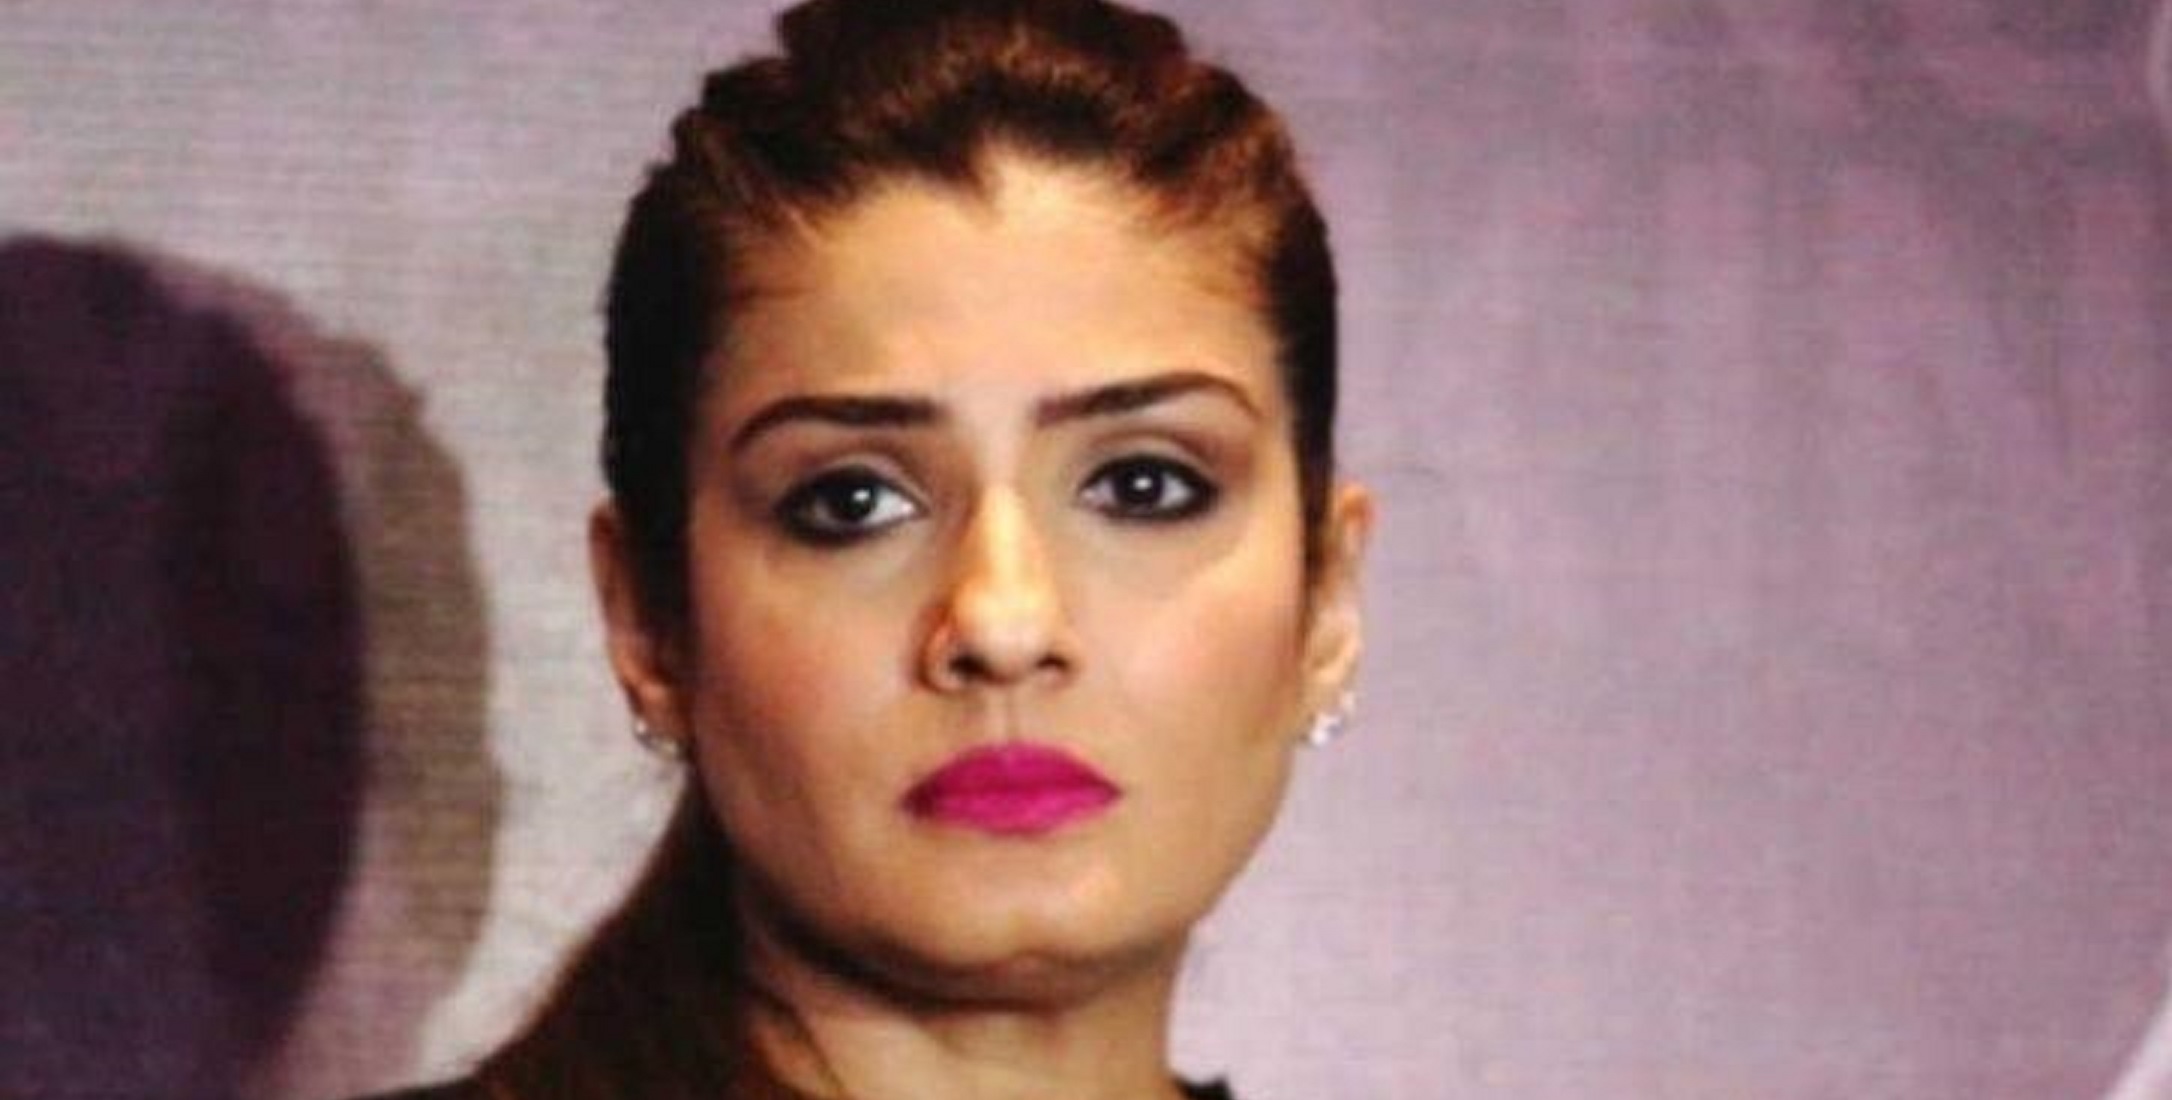 Raveena Tandon Says She Faced Prejudice In Bollywood, “I Was Not Sleeping Around For Roles”